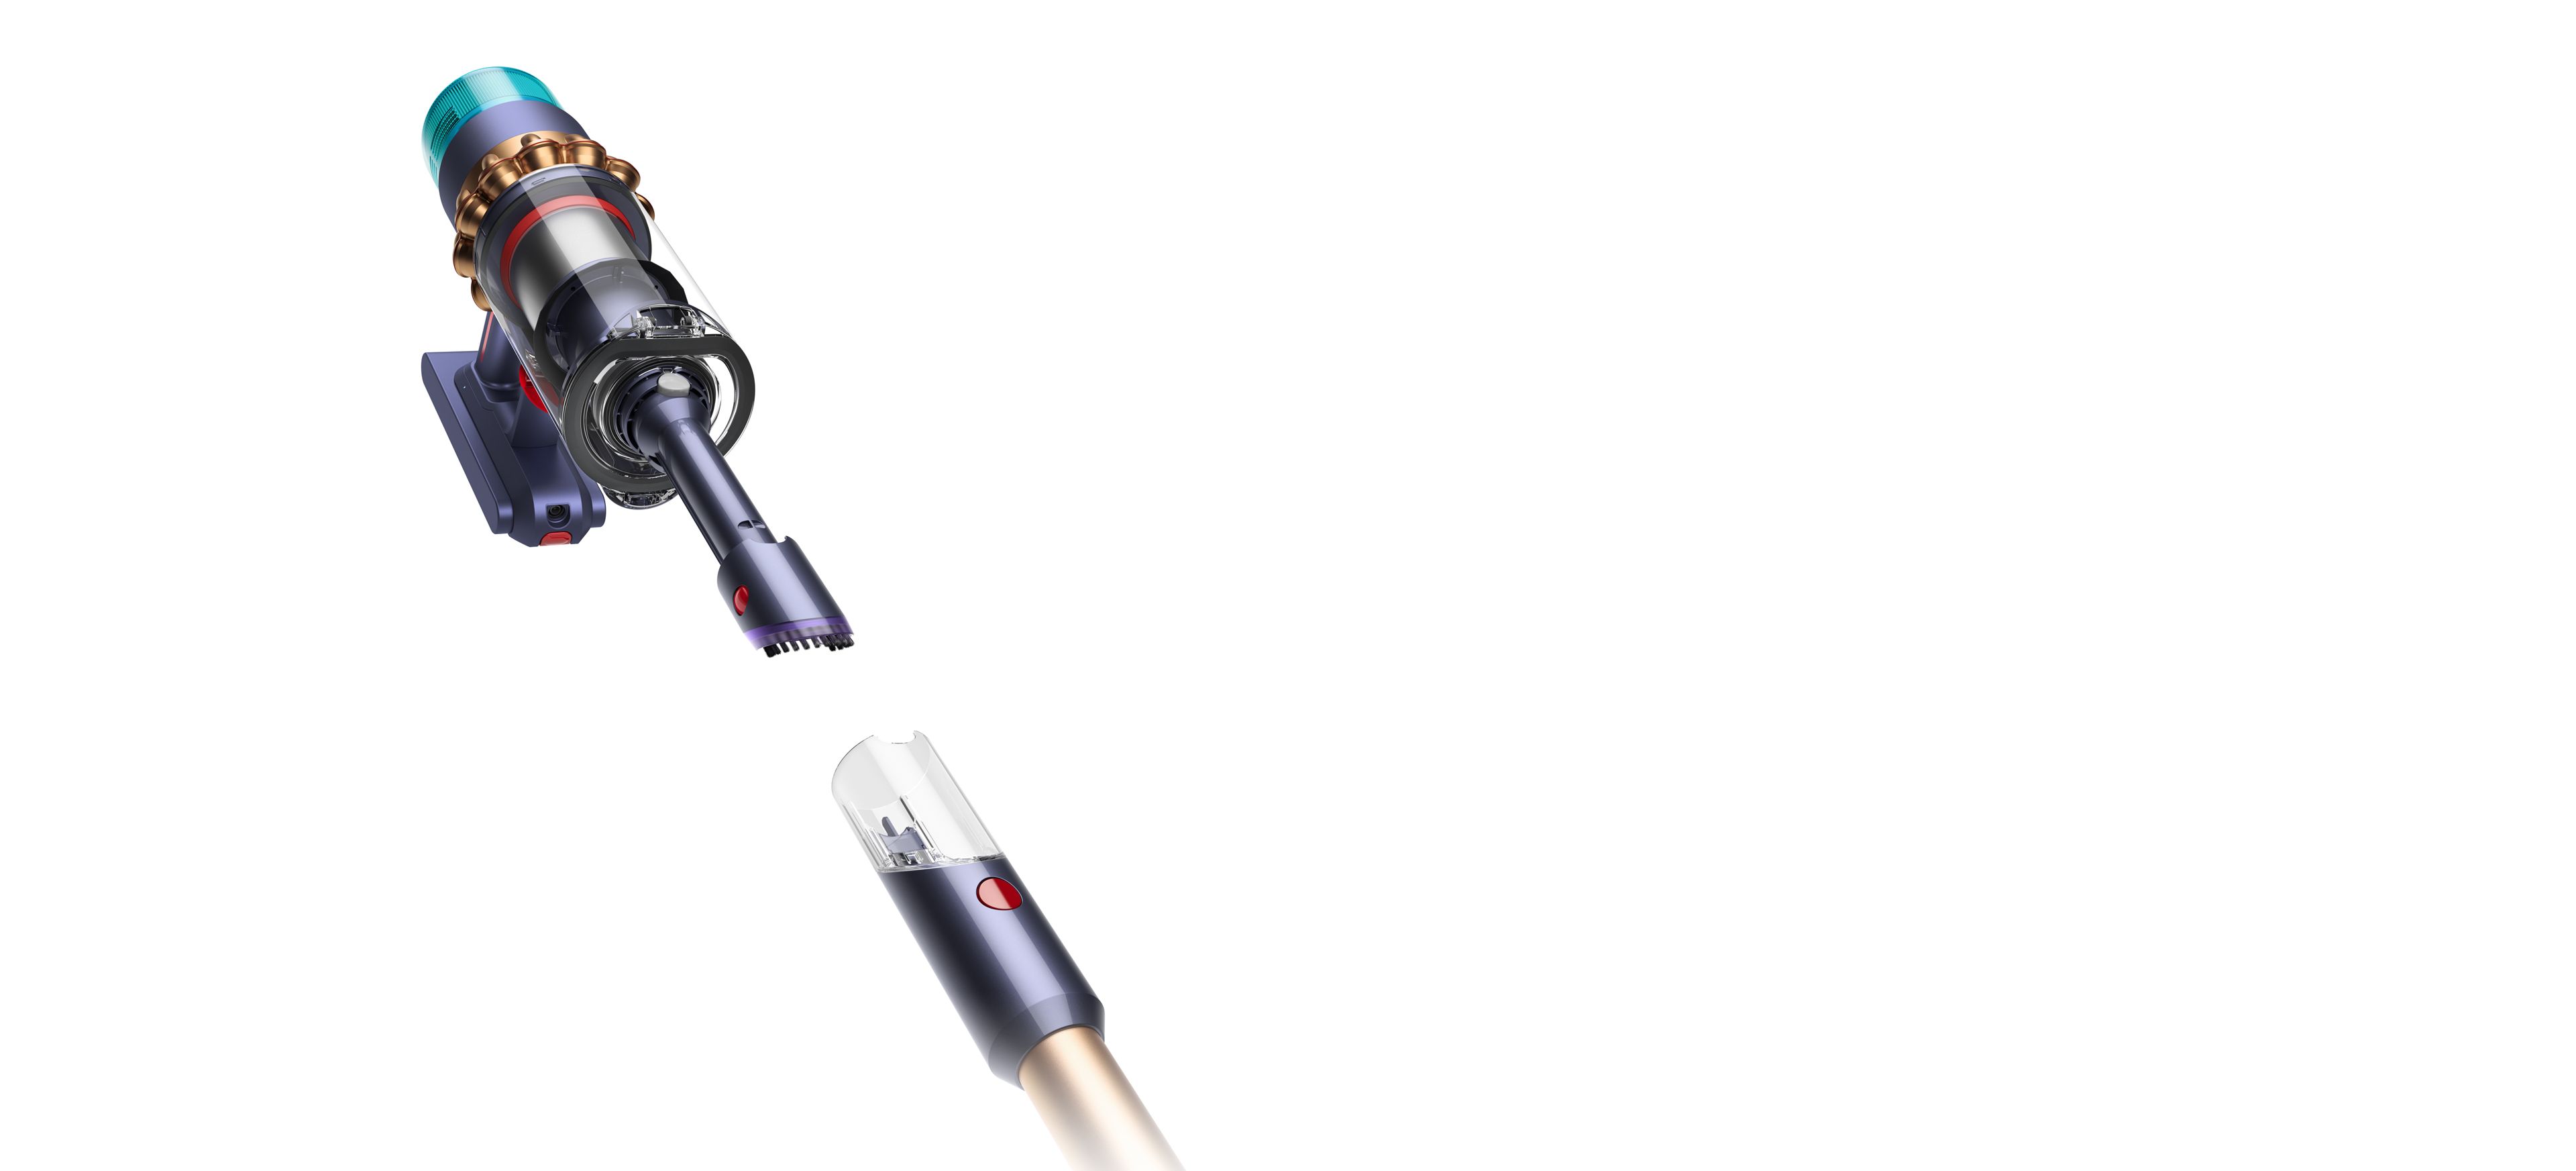 The Dyson Gen5detect shown with its Built-in dusting and crevice tool.